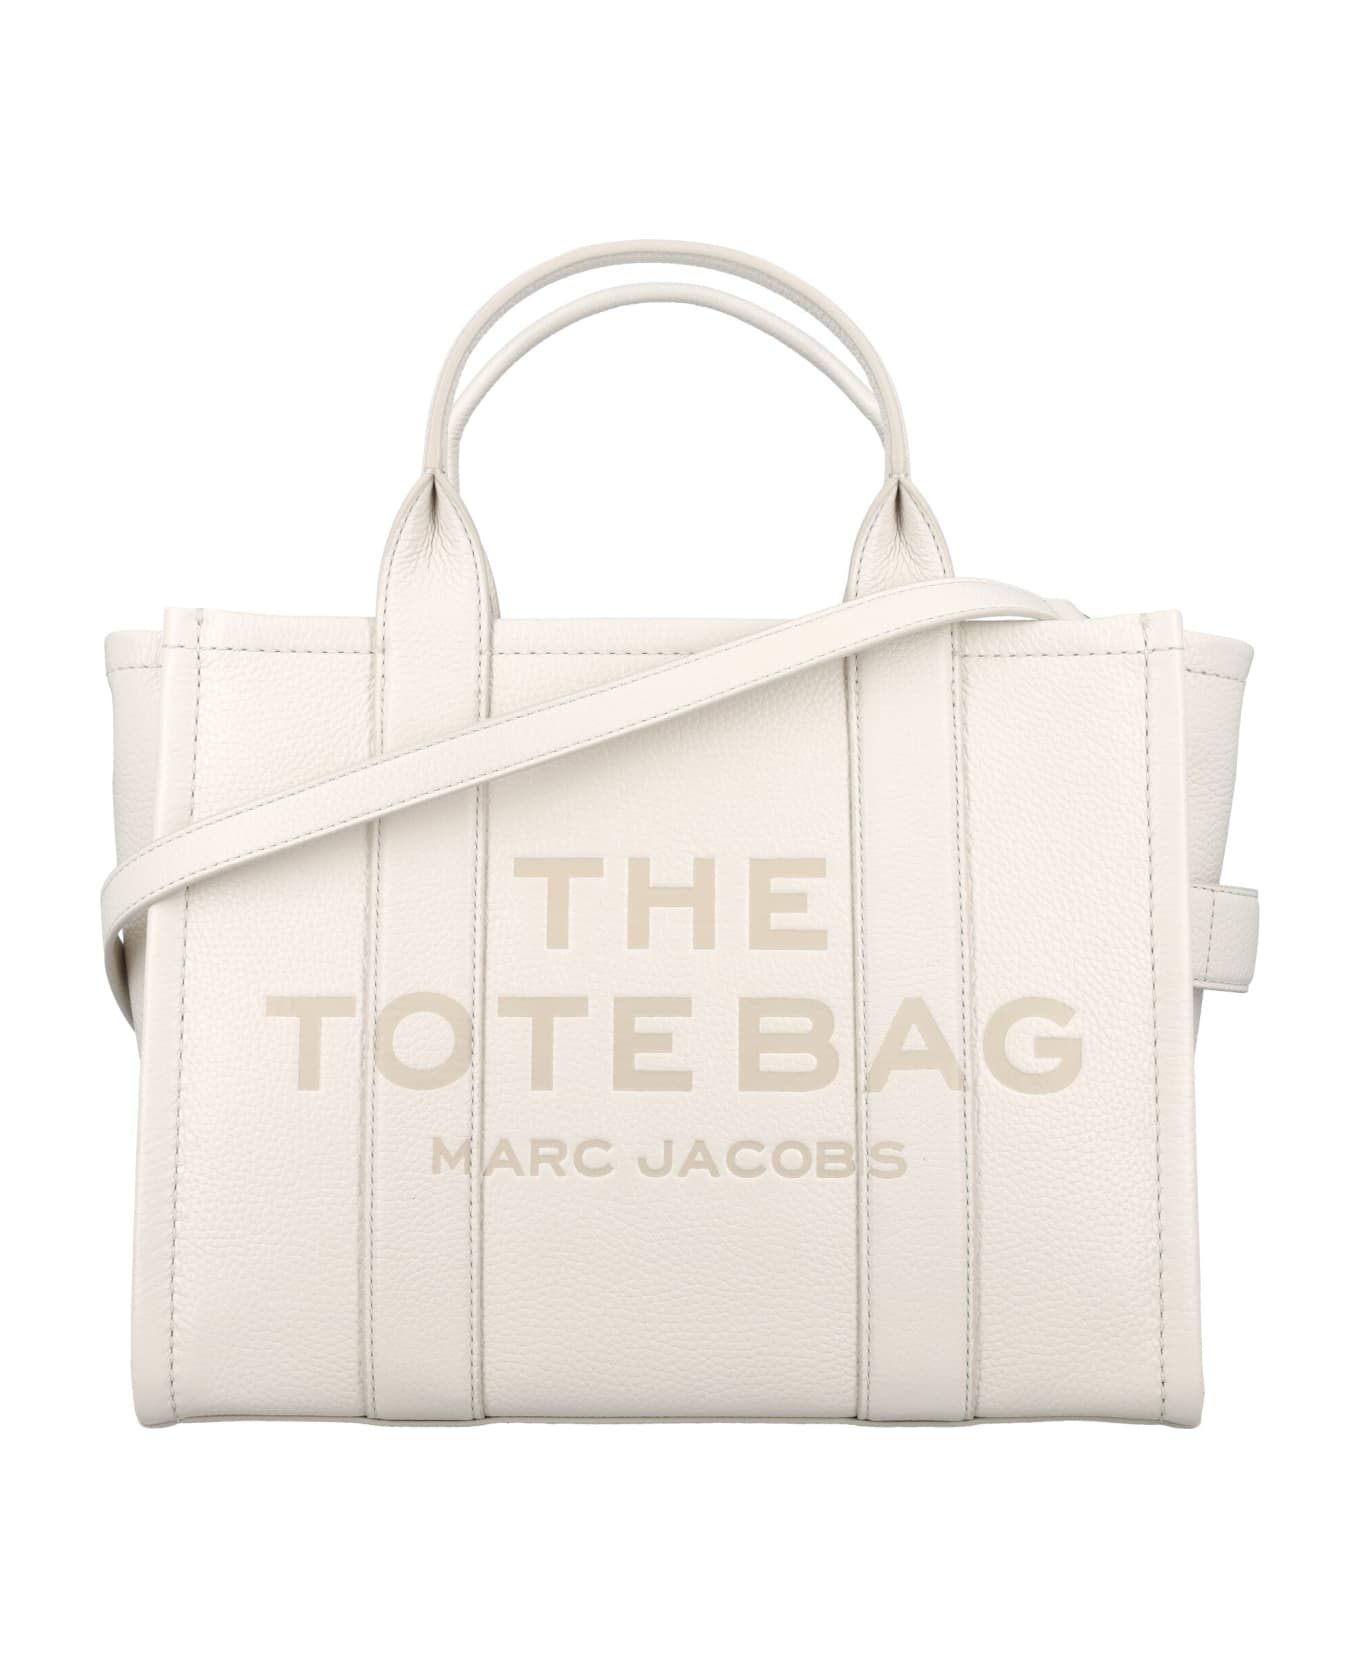 Marc Jacobs The Leather Medium Tote Bag - COTTON SILVER